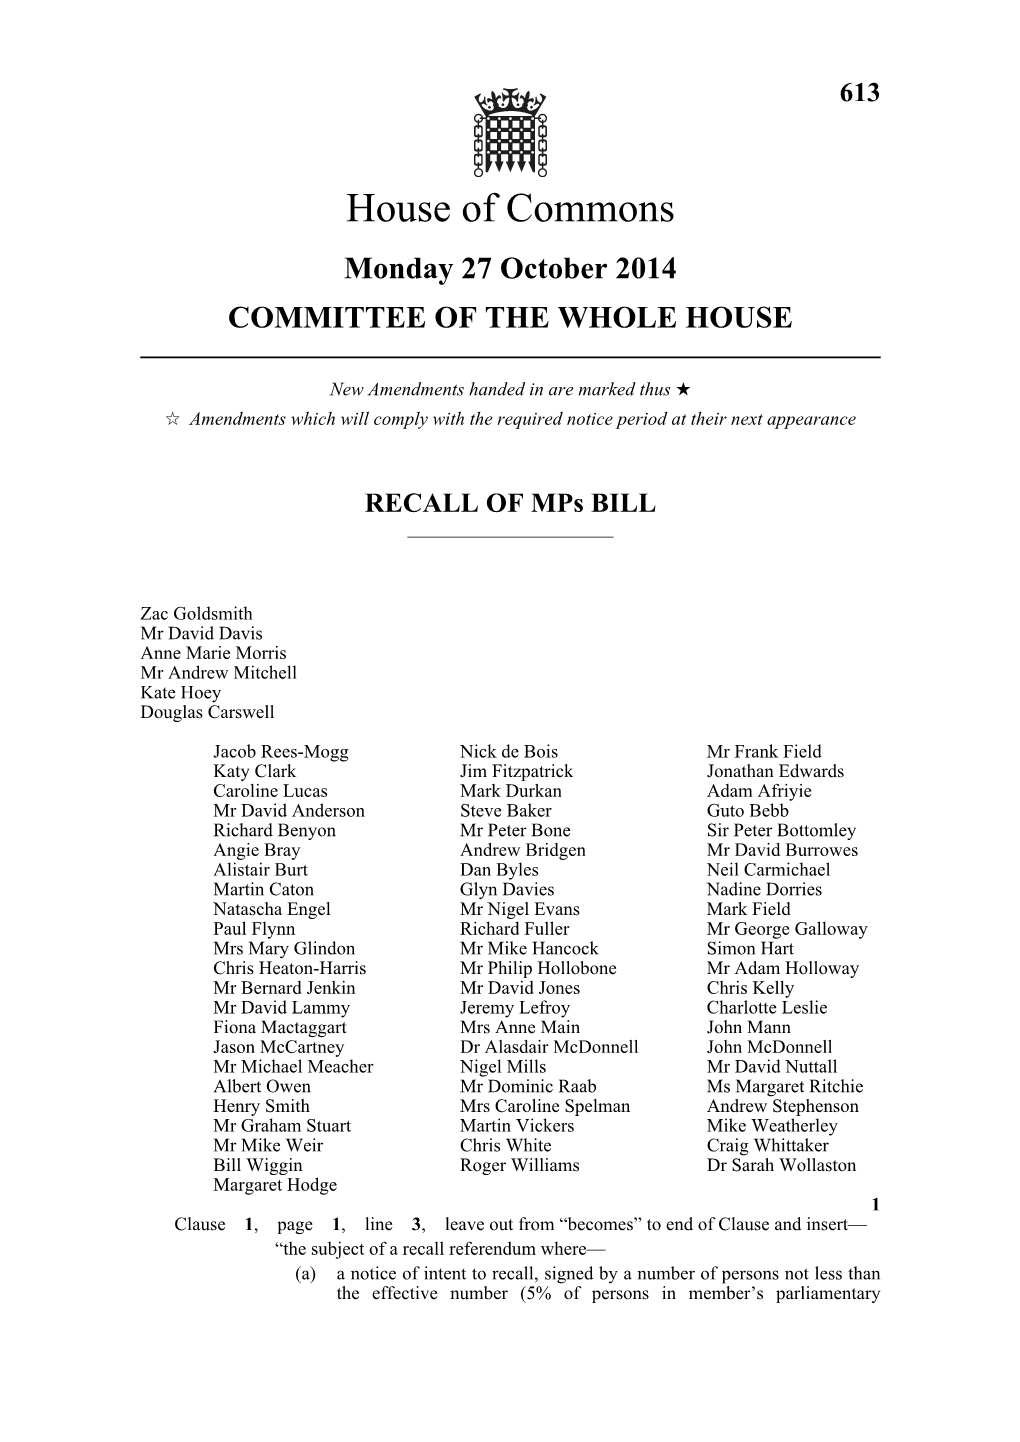 613 Monday 27 October 2014 COMMITTEE